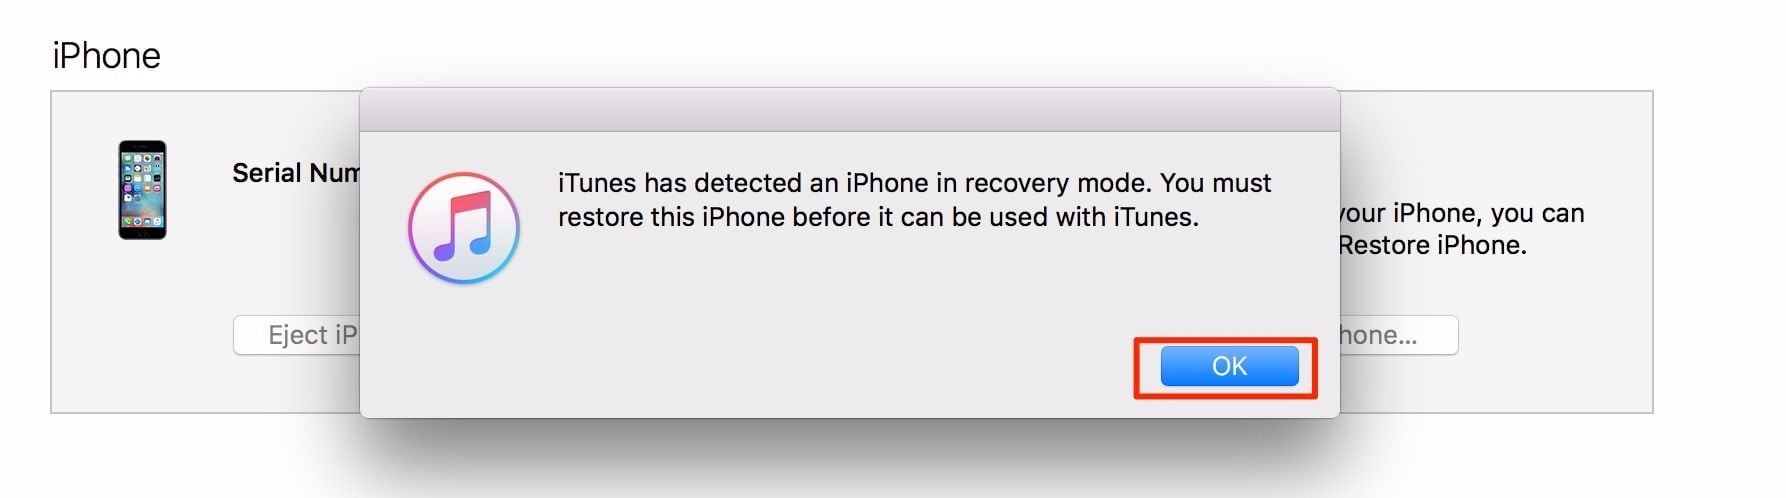 How to Fix “iPhone is Disabled, Connect to iTunes” Issue | DeviceDaily.com